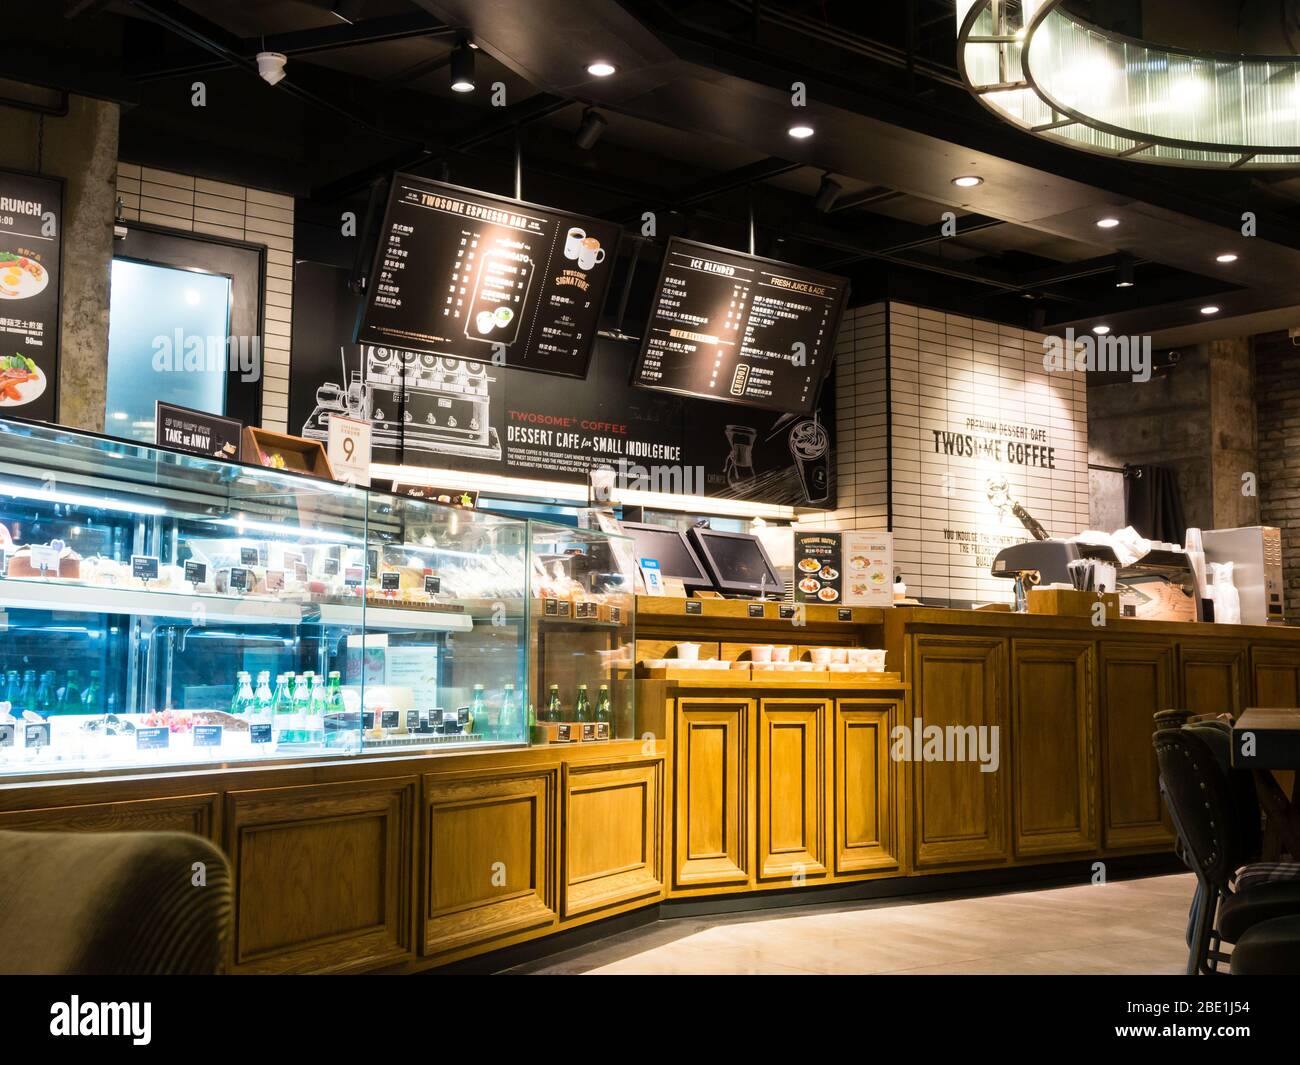 Shanghai, China - March 20, 2016: The interior of Twosome coffee cafe in Pudong with quiet atmosphere Stock Photo